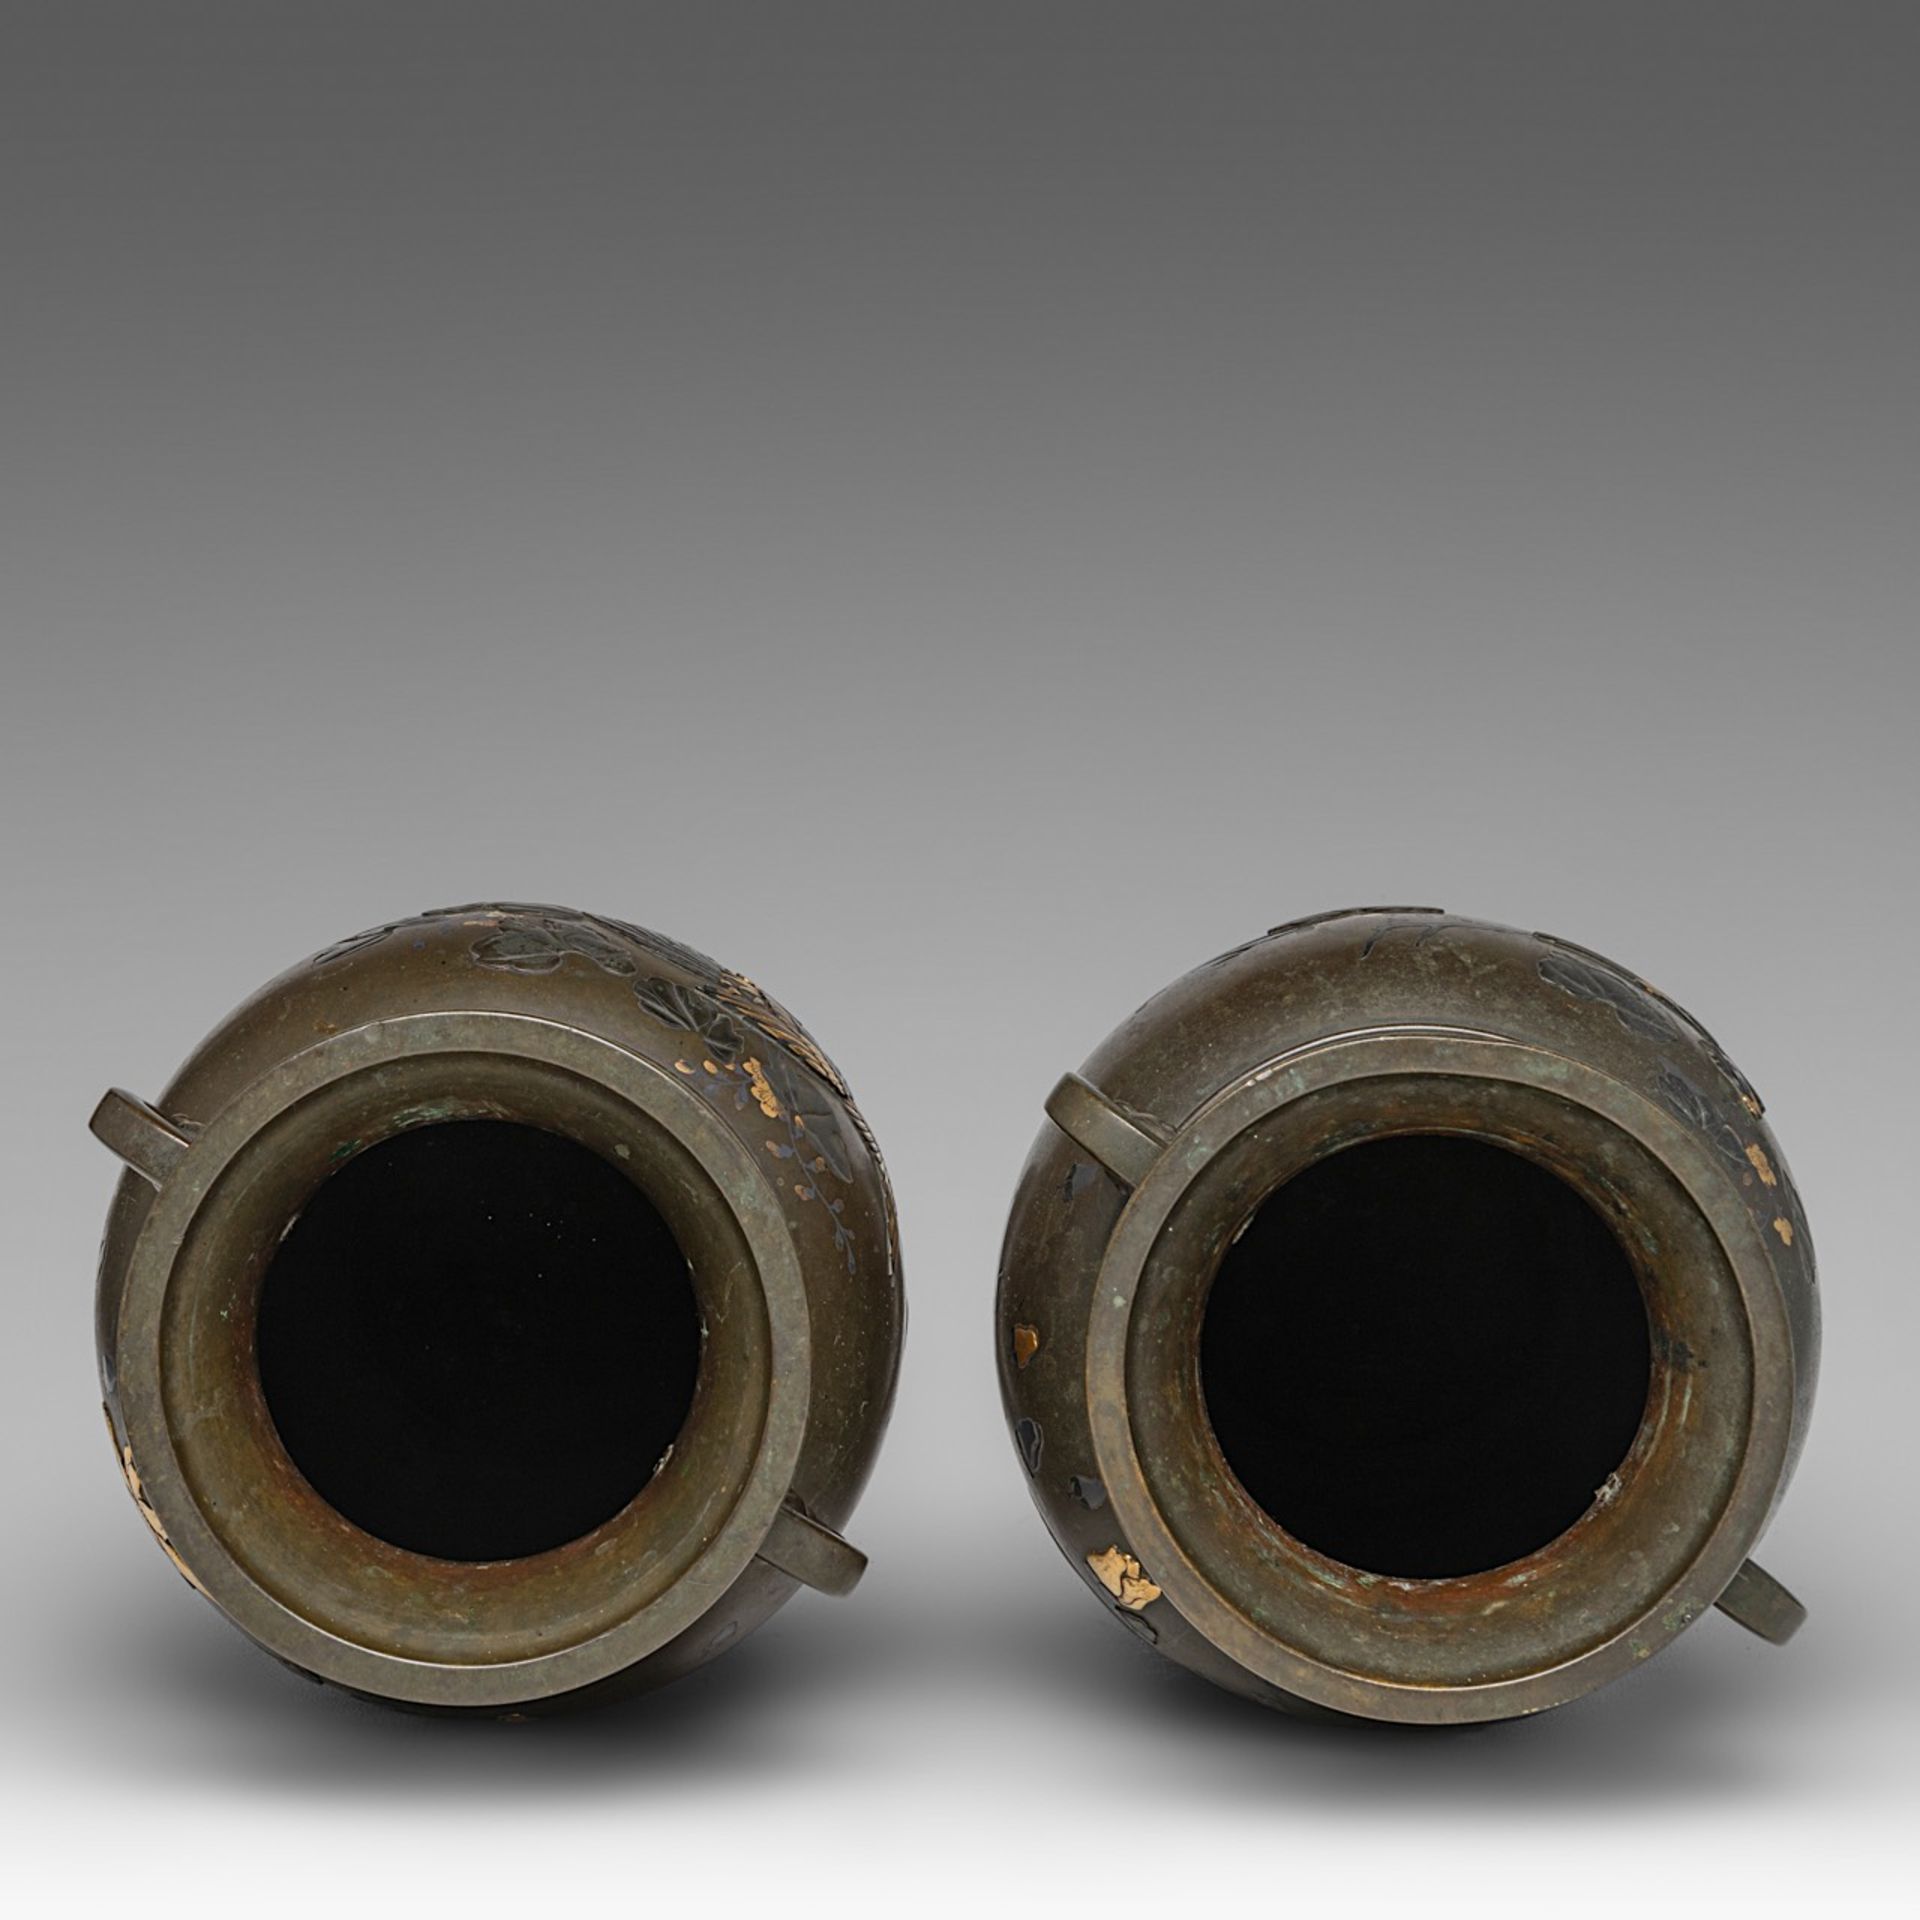 A pair of Japanese bronze 'Phoenix' vases with gilt details, Meiji period (1868-1912), both H 41,5 c - Image 5 of 6